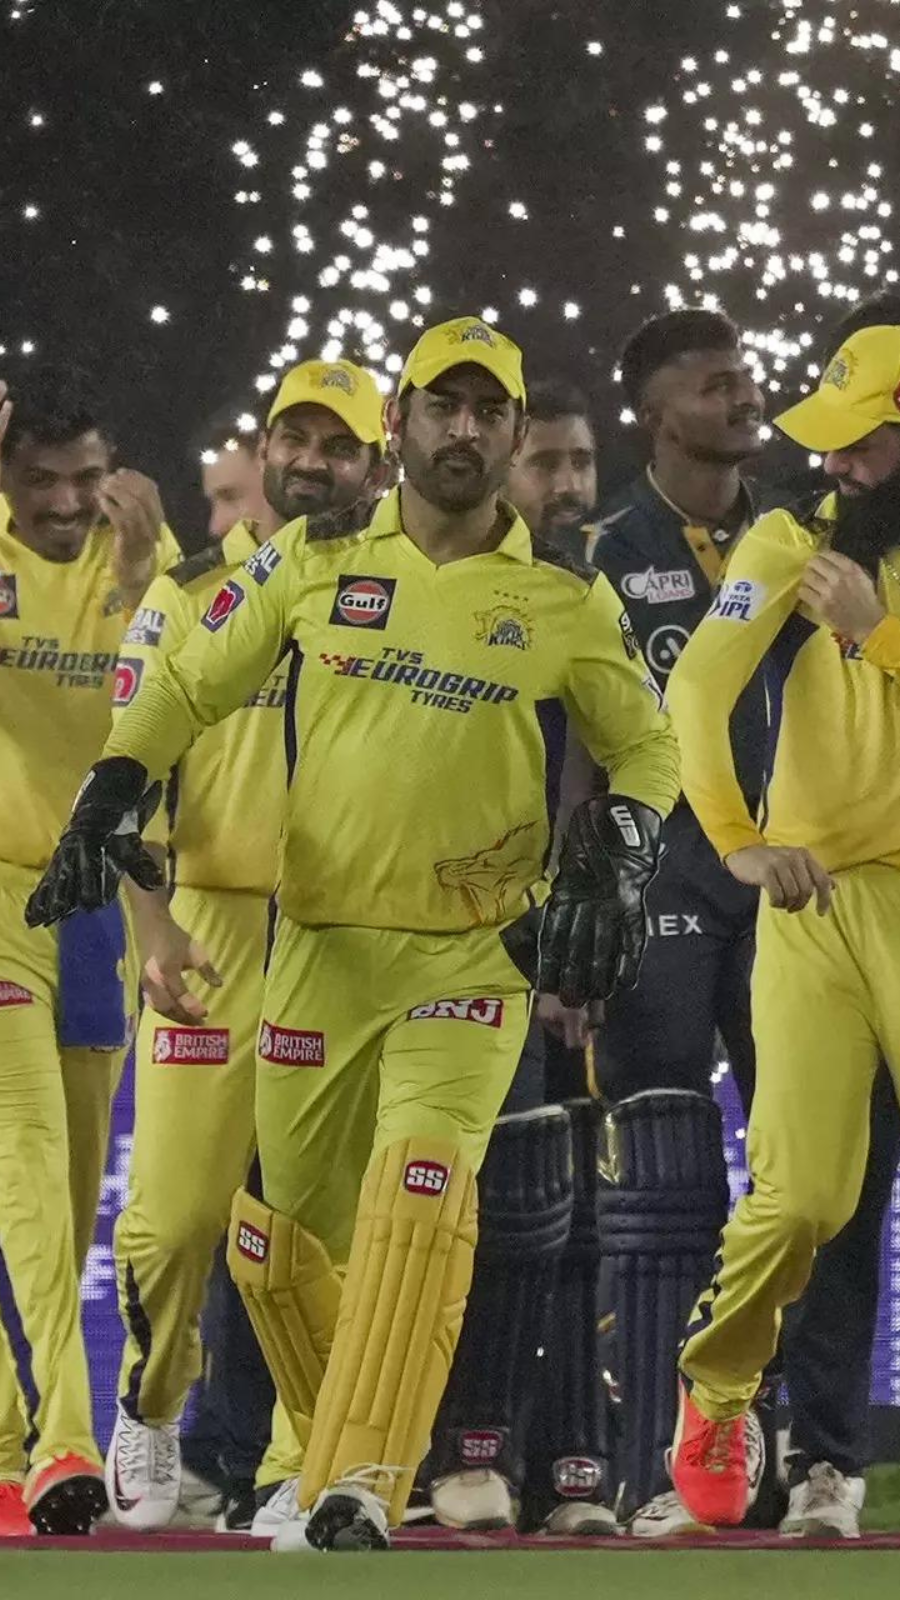 Capturing MS Dhoni's moods as CSK wins 5th IPL title